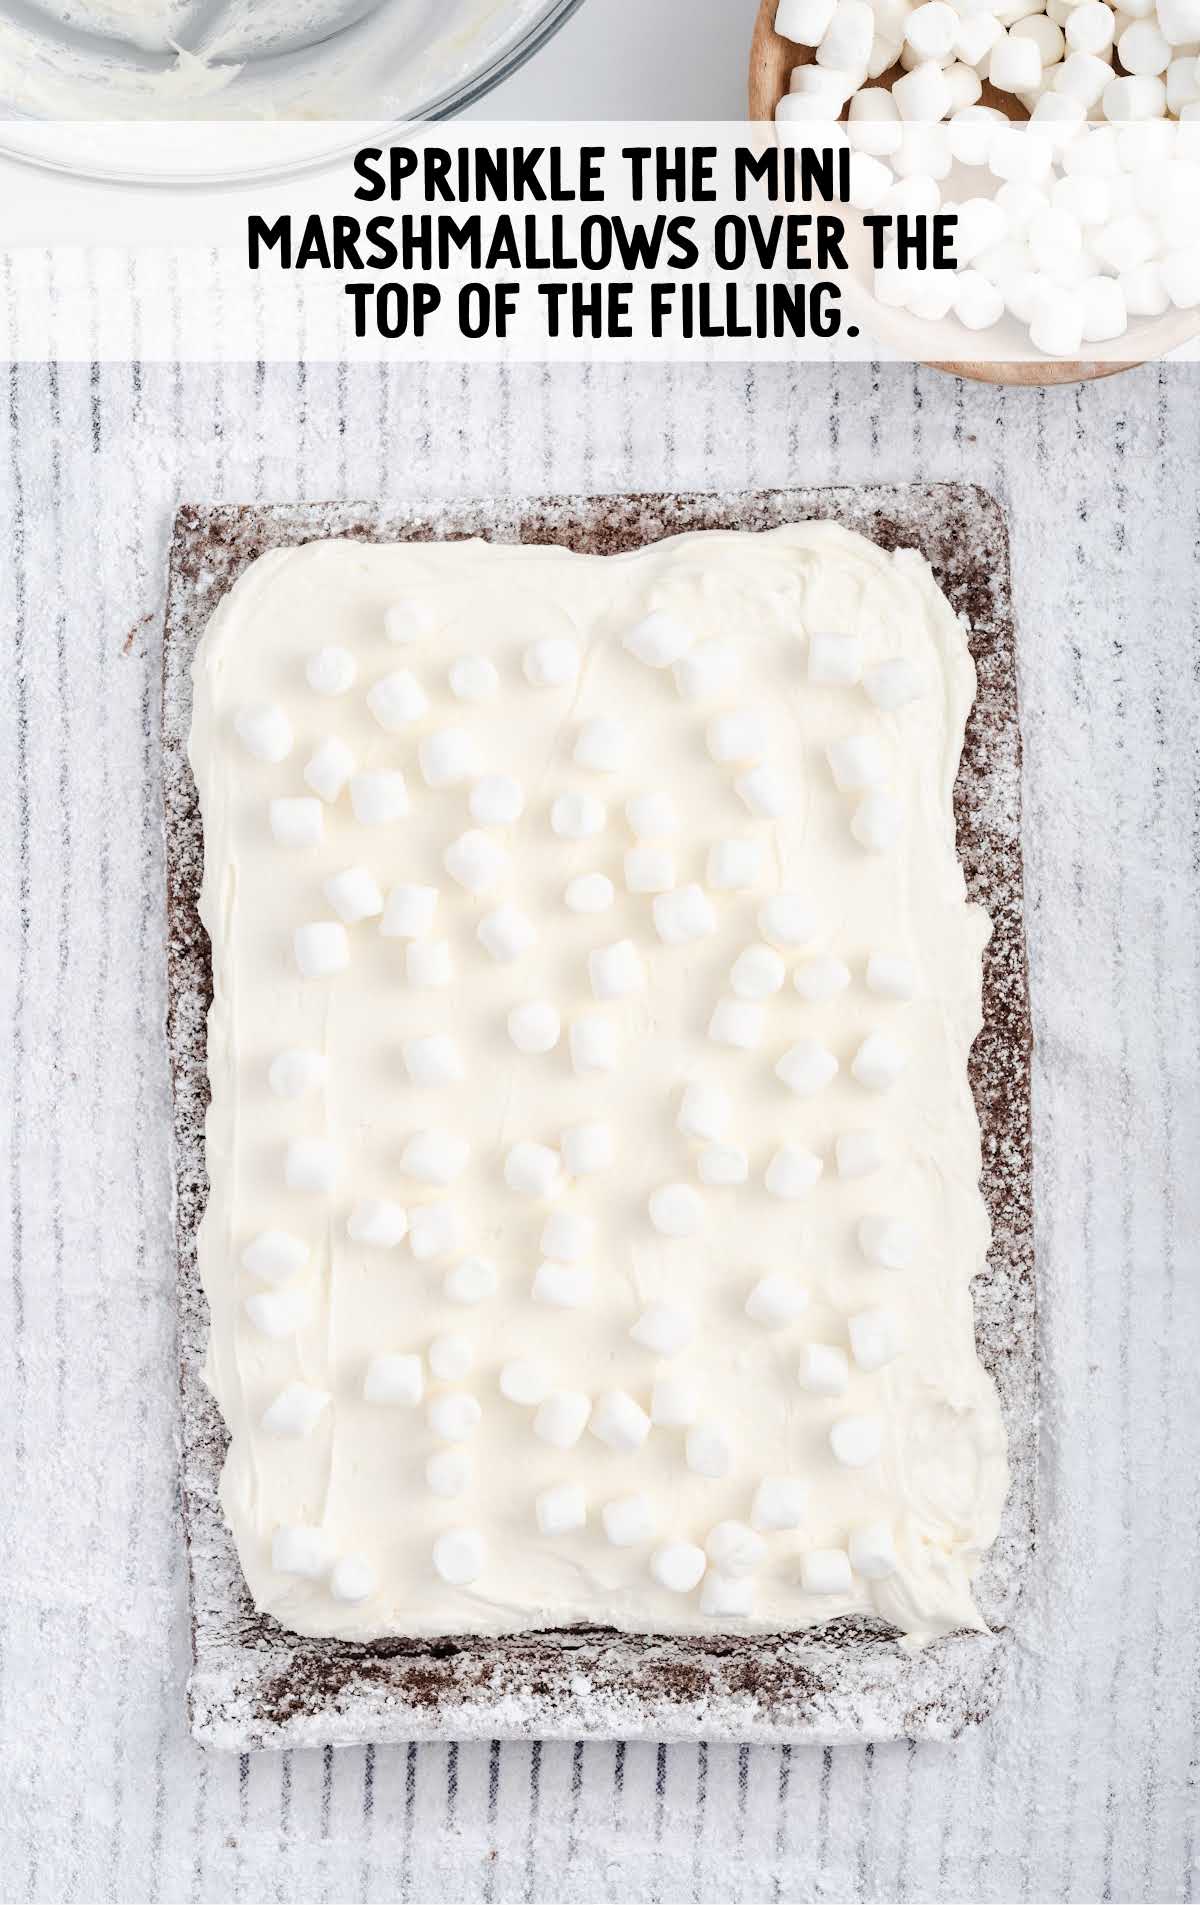 marshmallows sprinkled over the top of the filling